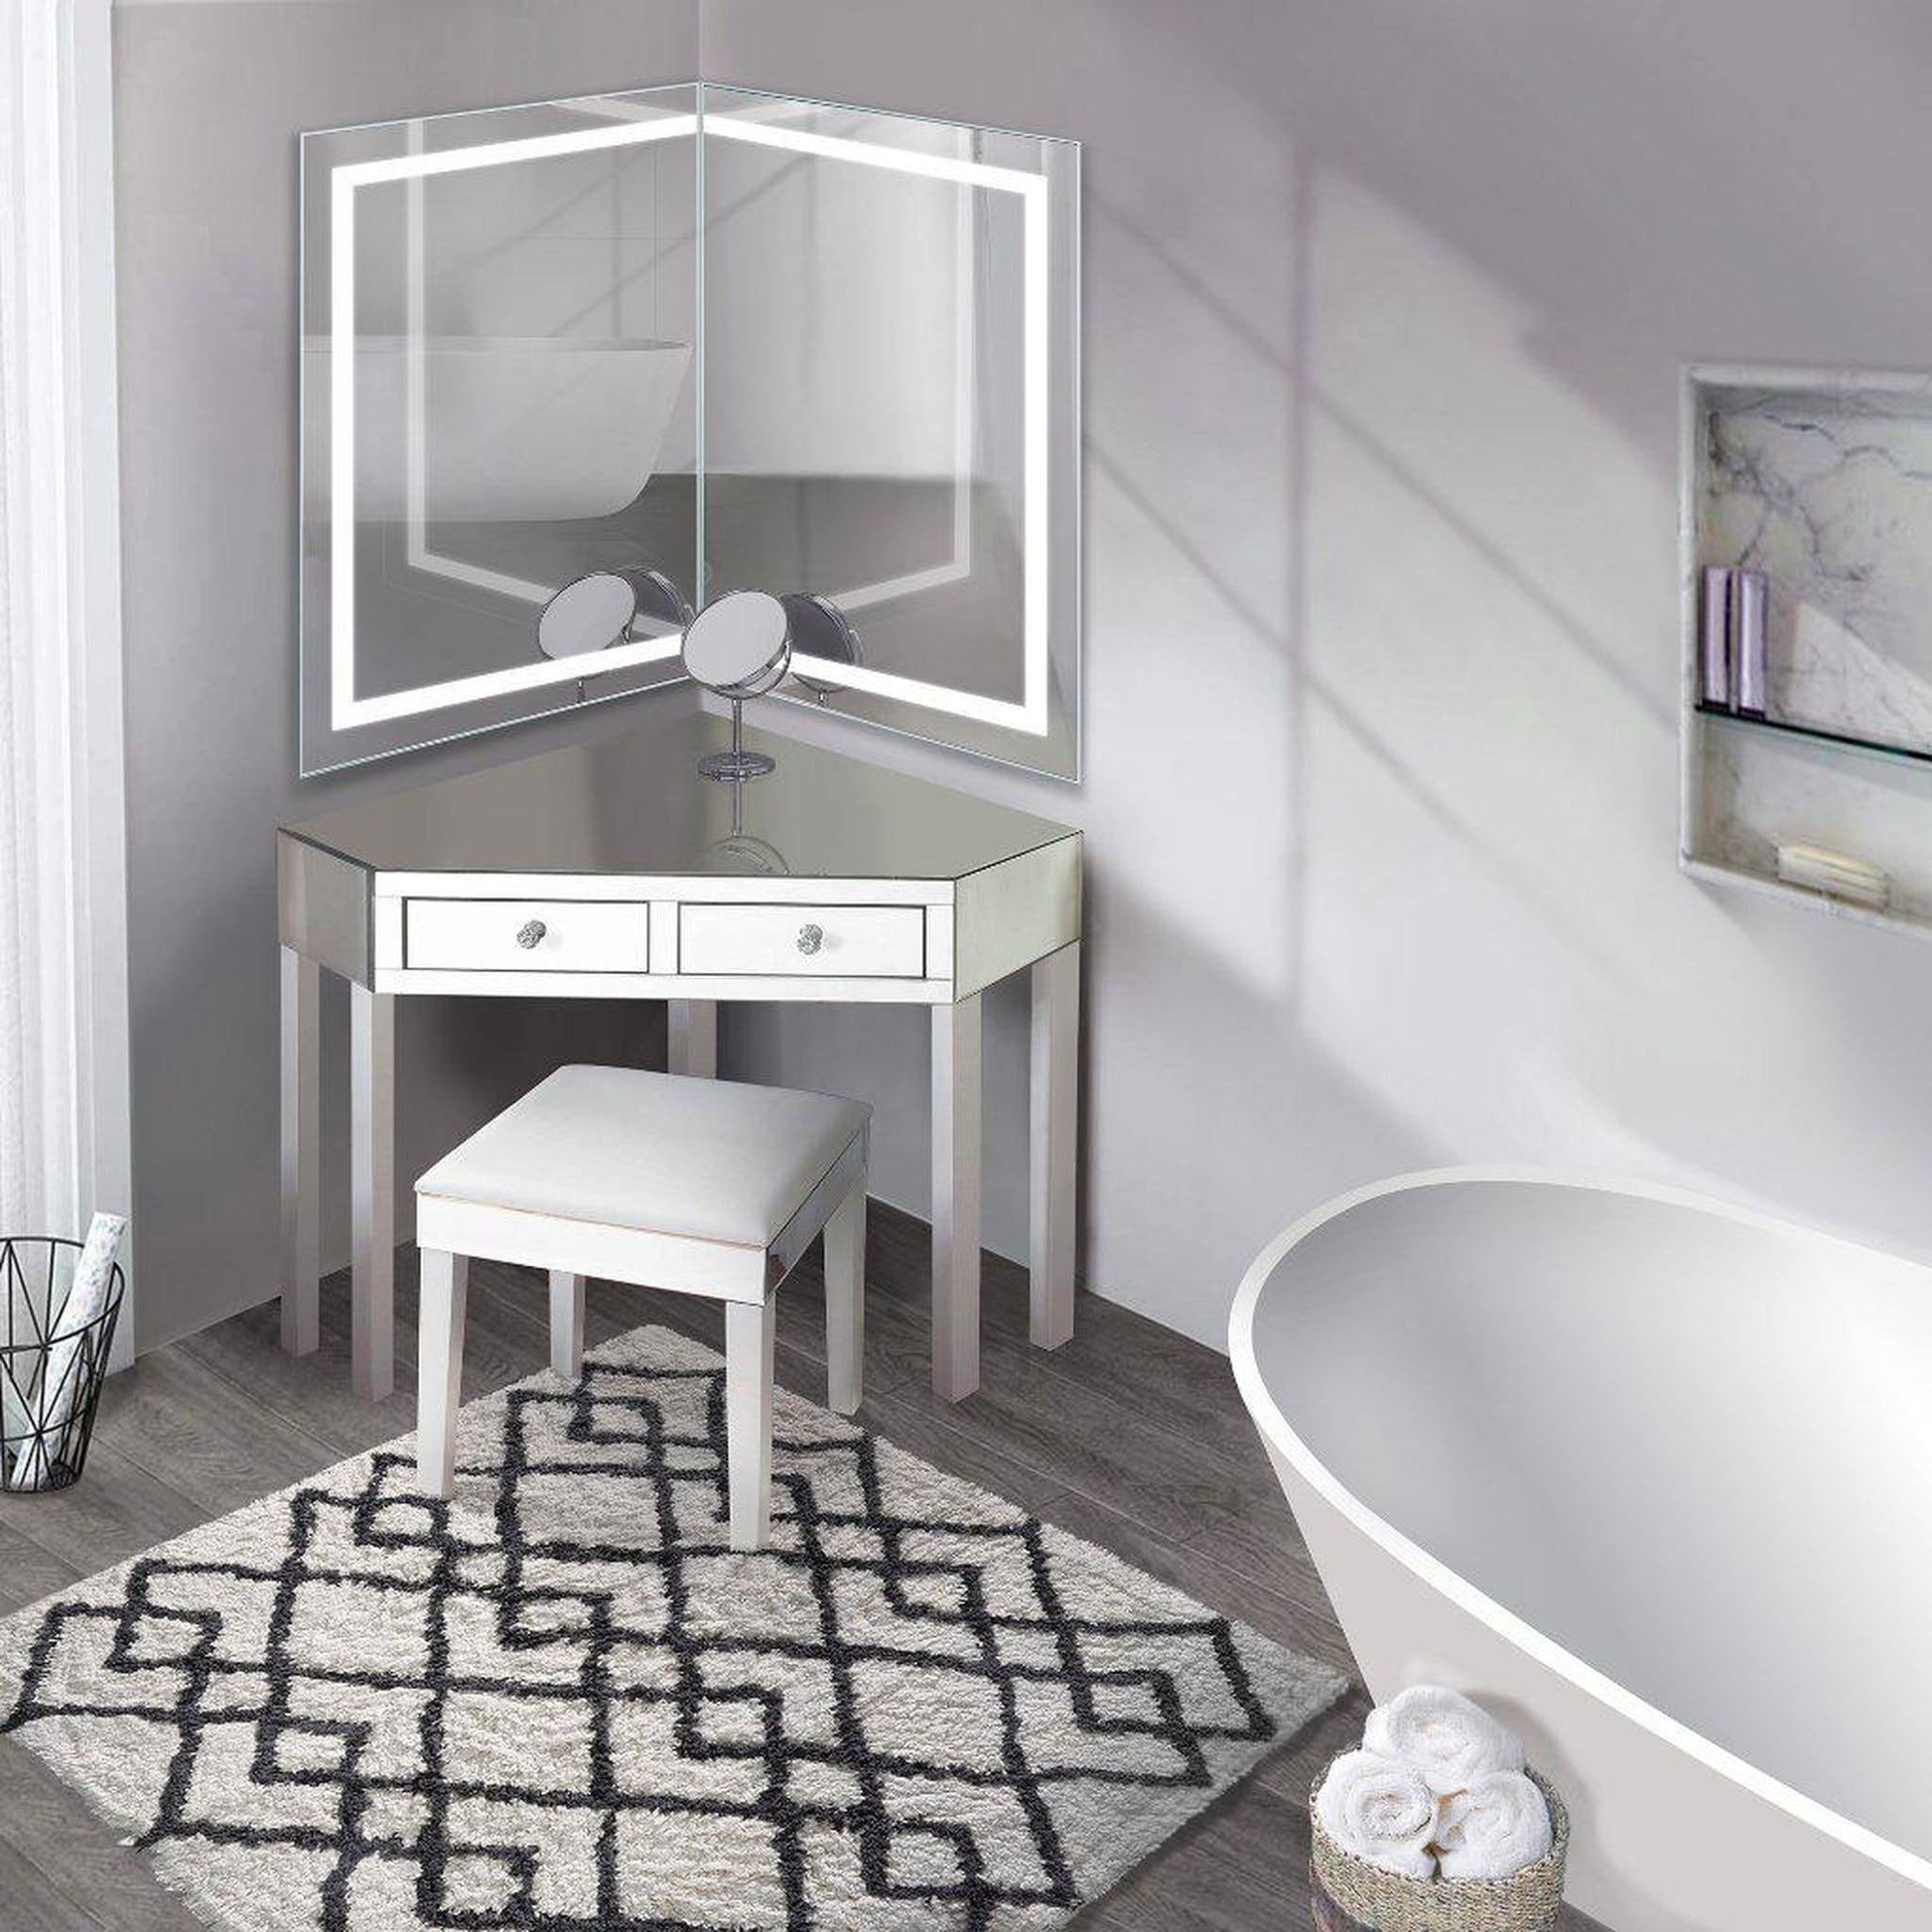 https://usbathstore.com/cdn/shop/products/Krugg-Reflections-Mod-48-x-36-24D-5000K-Rectangular-Modular-Corner-Wall-Mounted-Silver-Backed-LED-Bathroom-Vanity-Mirror-With-Built-in-Defogger-and-Dimmer-2.jpg?v=1681902602&width=1946